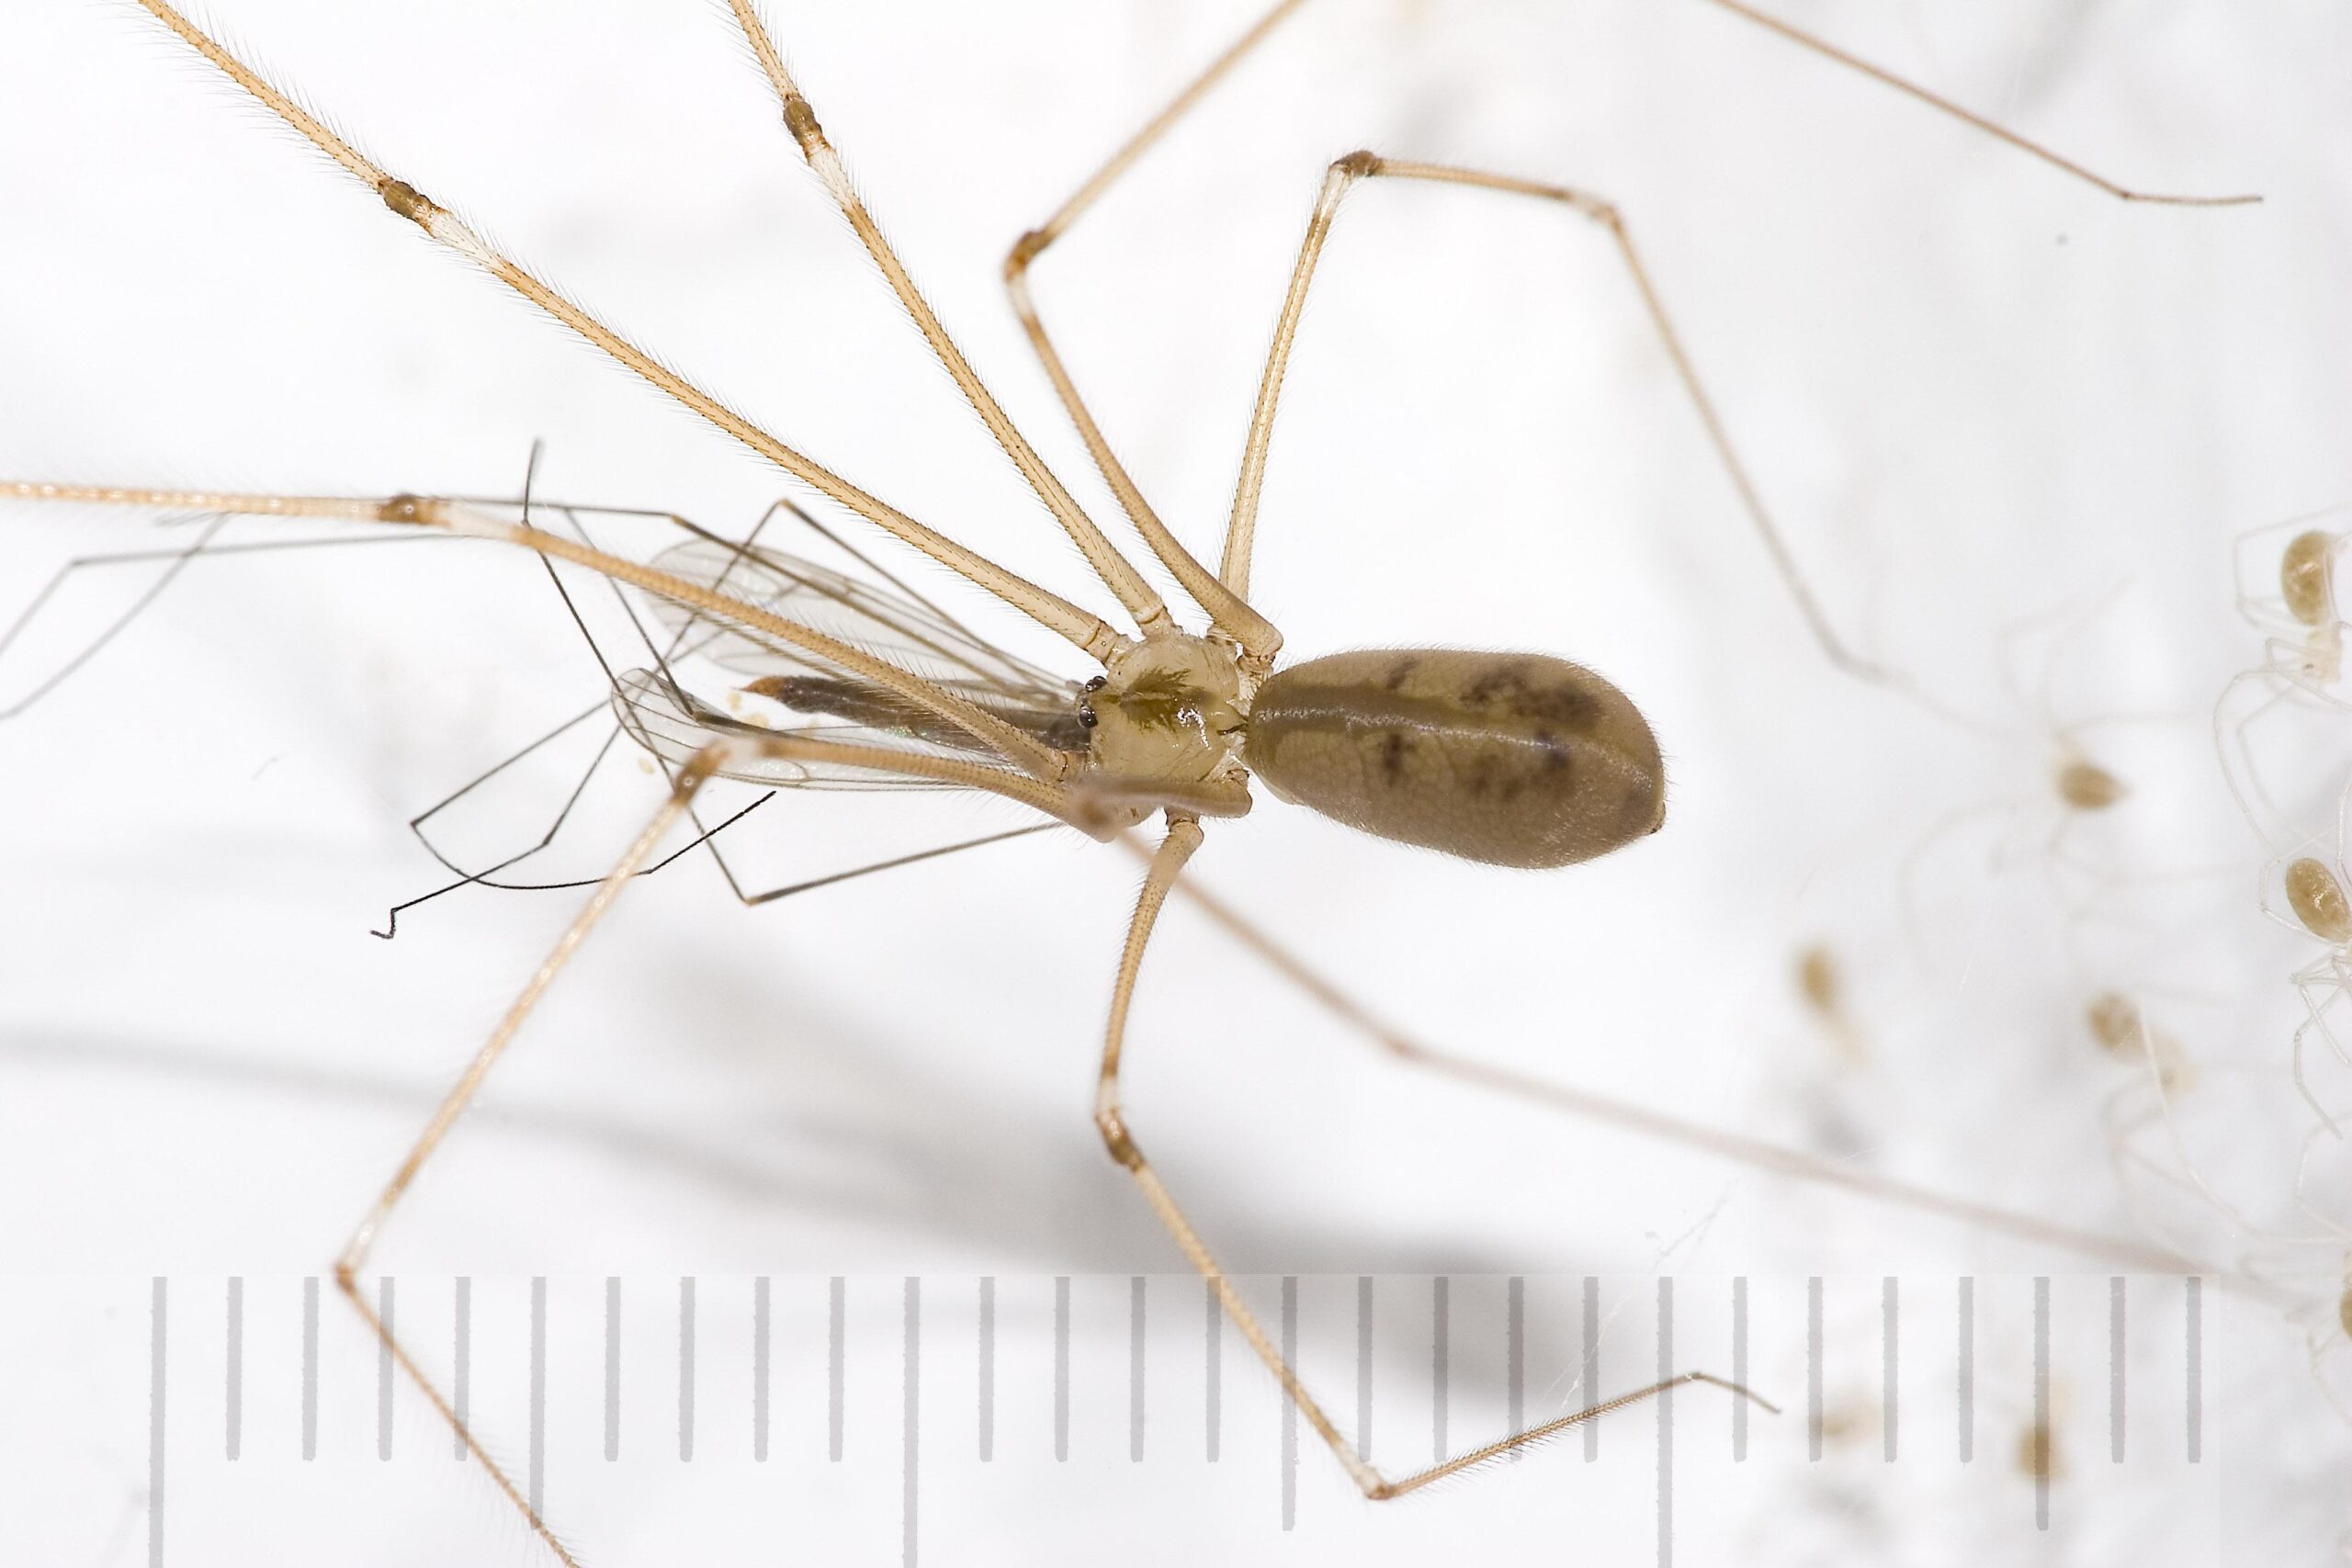 Long-bodied cellar spider, commonly known as 'Dead Daddy Longlegs', provided by Pest Me Off pest control services, specializing in safe and effective pest removal.